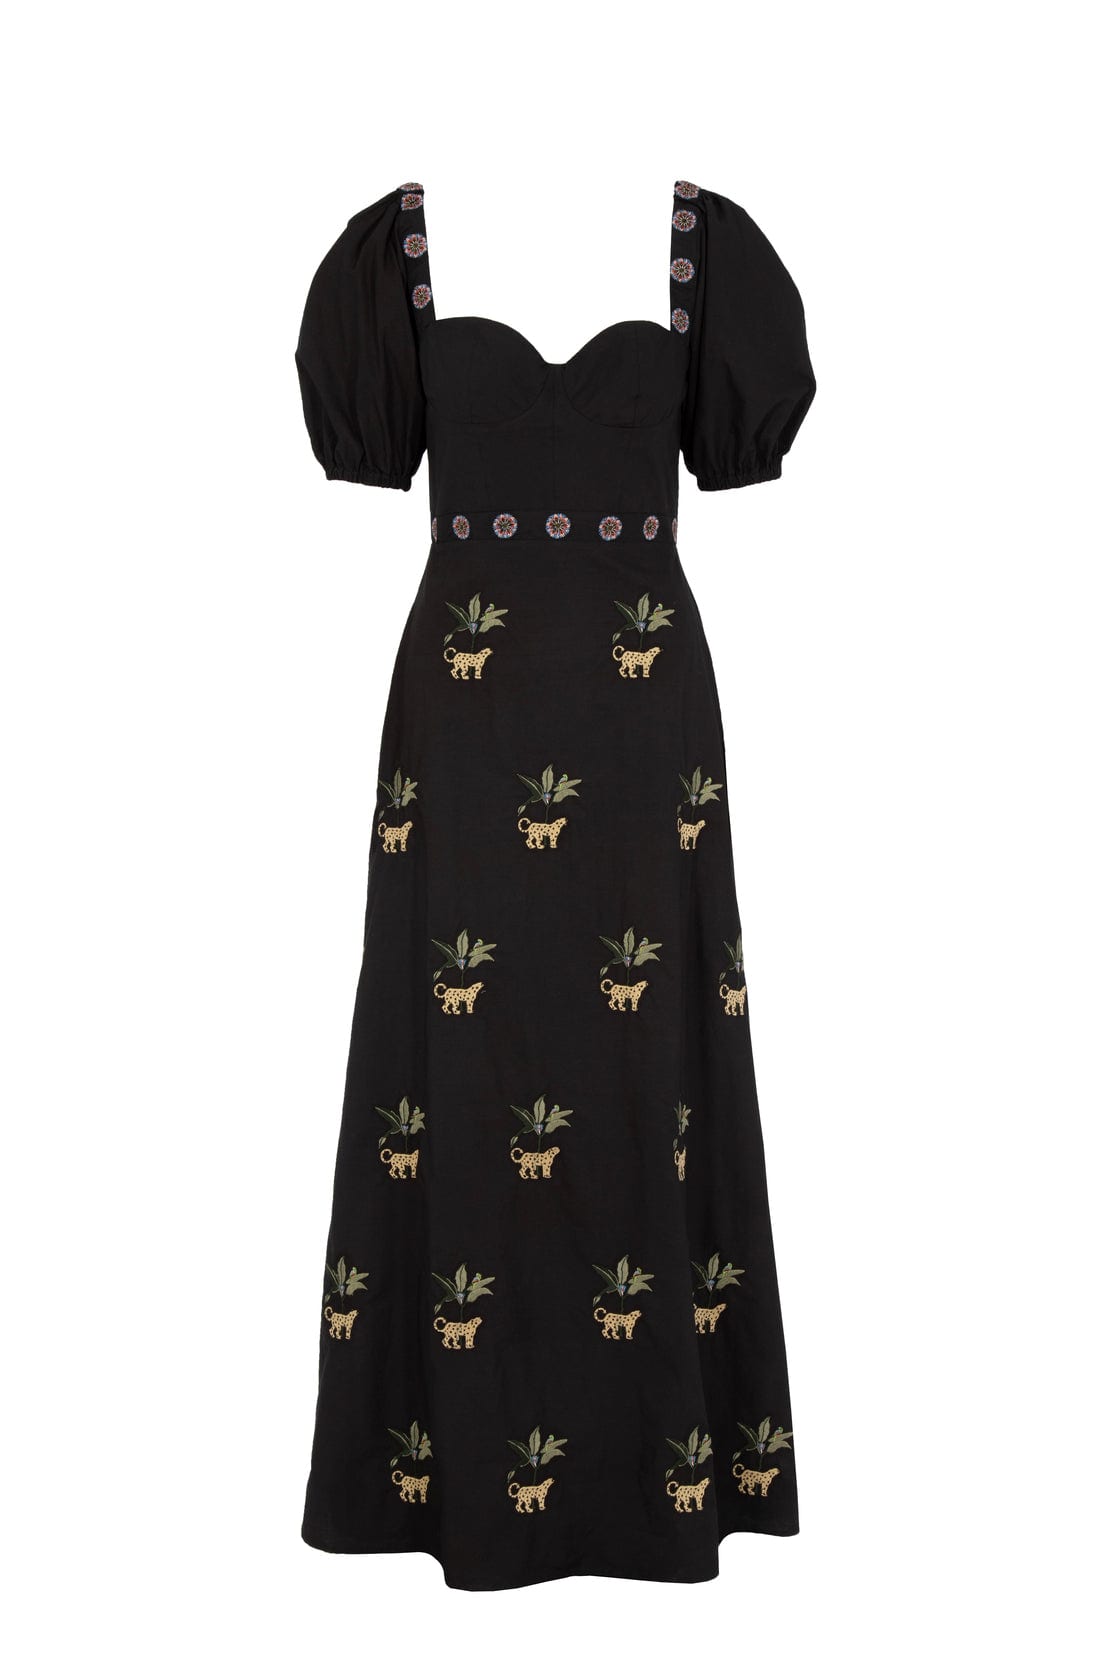 Amotea Francis Dress In Black Embroidery